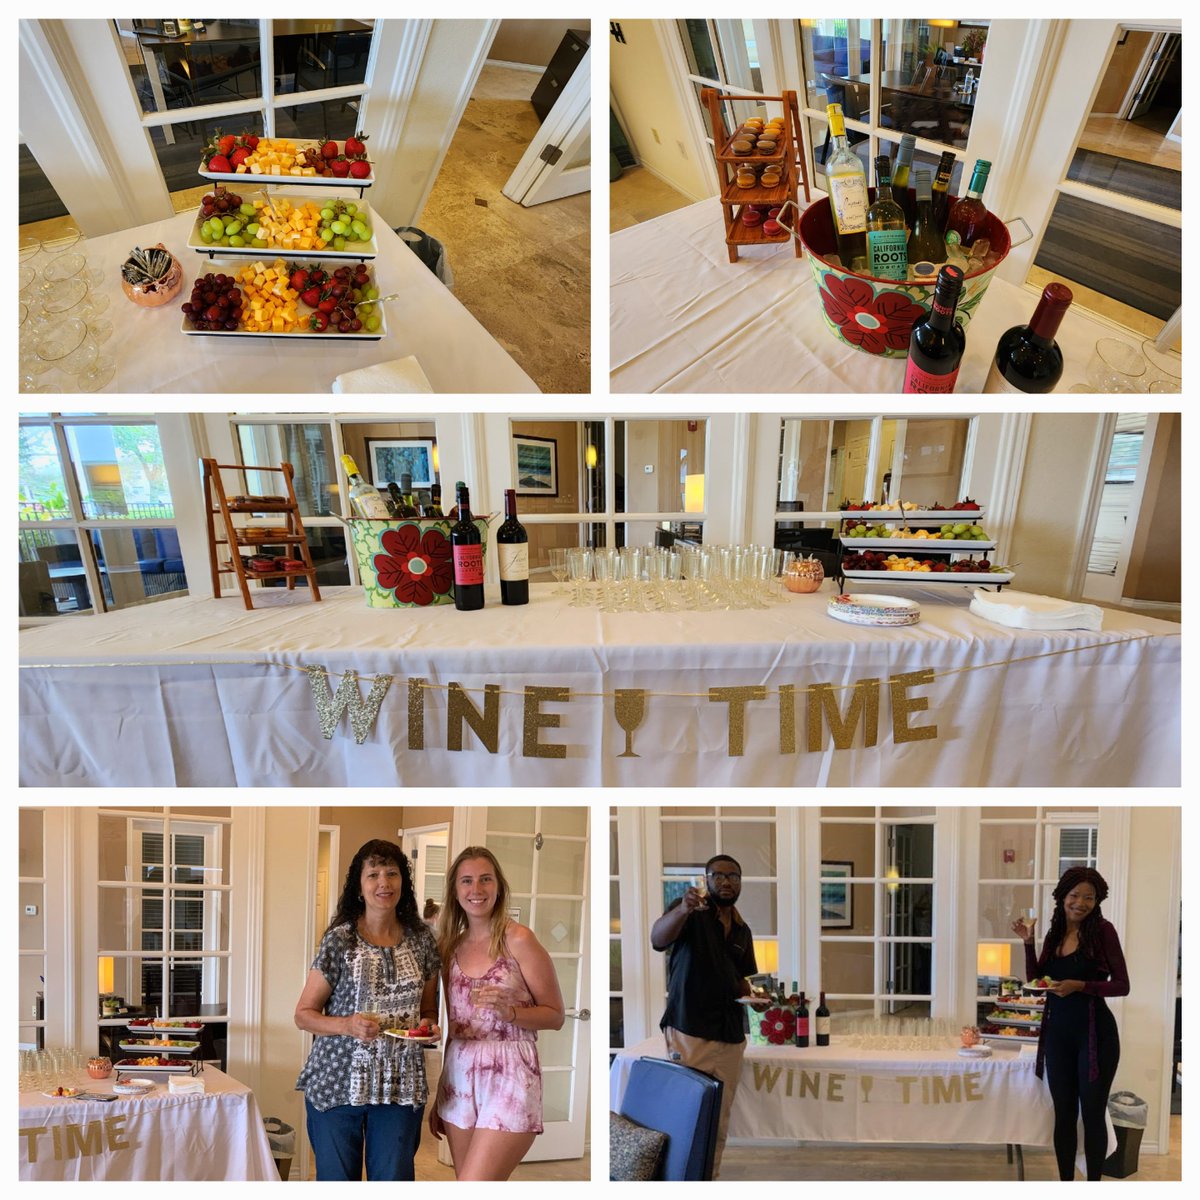 We had a blast Celebrating National Wine Day with our residents!

#LoveWhereYouLive #WeLoveOurResidents #Community #ResidentEvents #LuxuryRentals #TakeAGuess #FortMyers #Macaroons #Wine #NationalWineDay